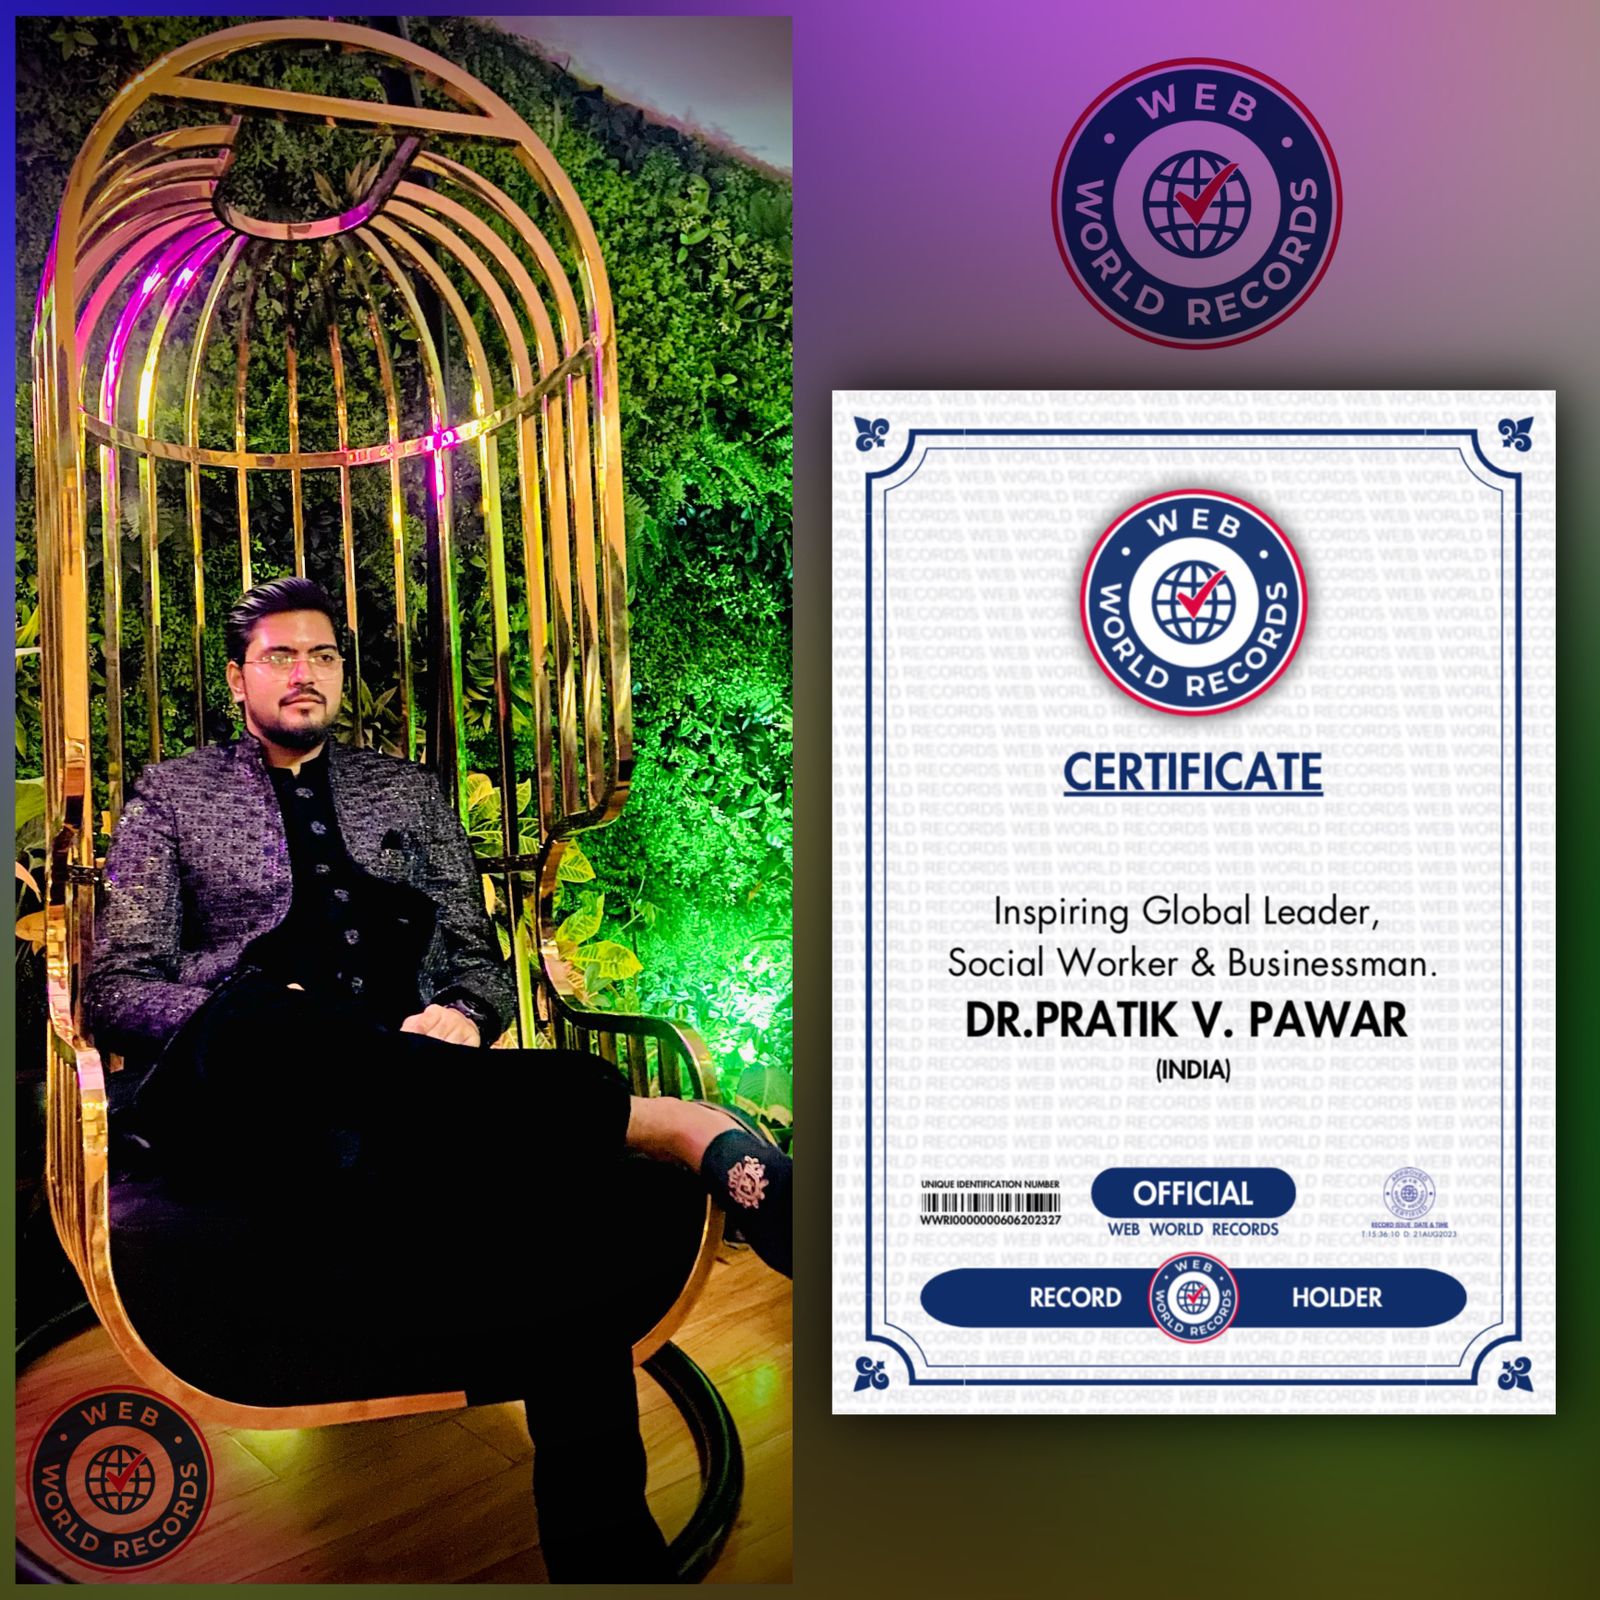 Celebrating a Trailblazer: Dr. Pratik V. Pawar Honored with Official World Records Award for his Inspiring Global Leadership, Humanitarian Contributions, and Entrepreneurial Brilliance.